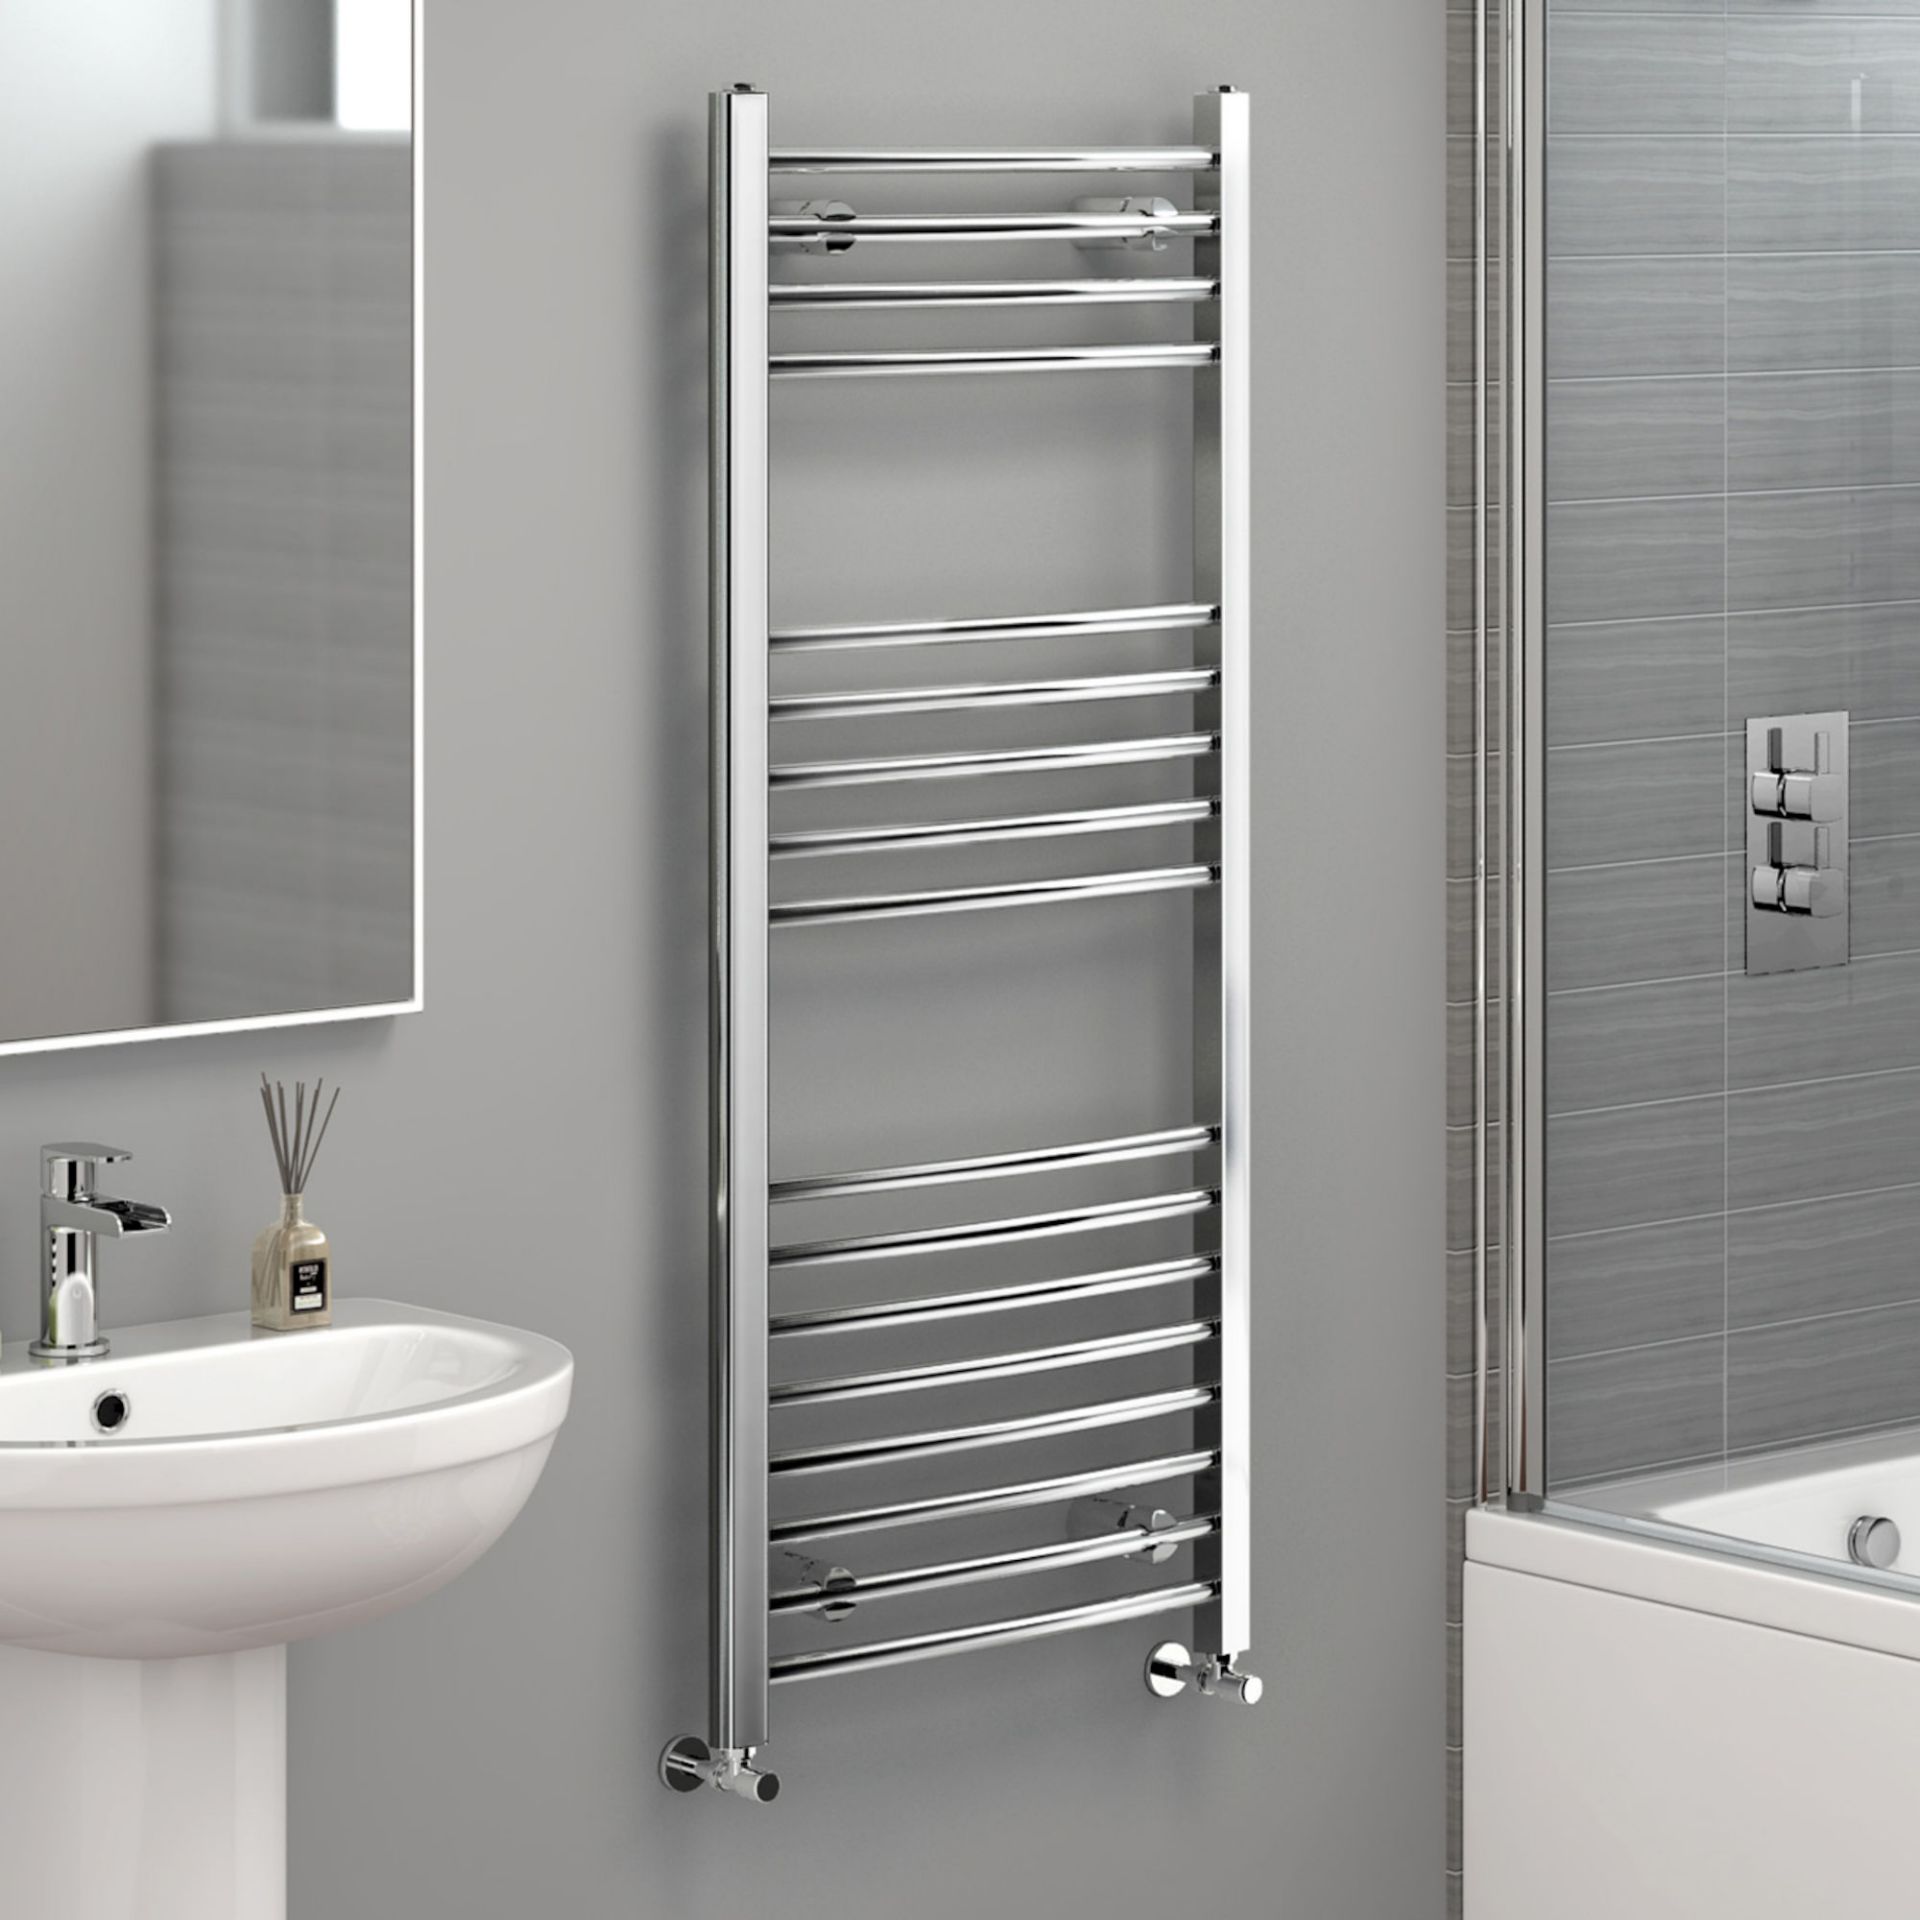 (EY121) 1200x500mm - 20mm Tubes - Chrome Curved Rail Ladder Towel Radiator. Made from chrome